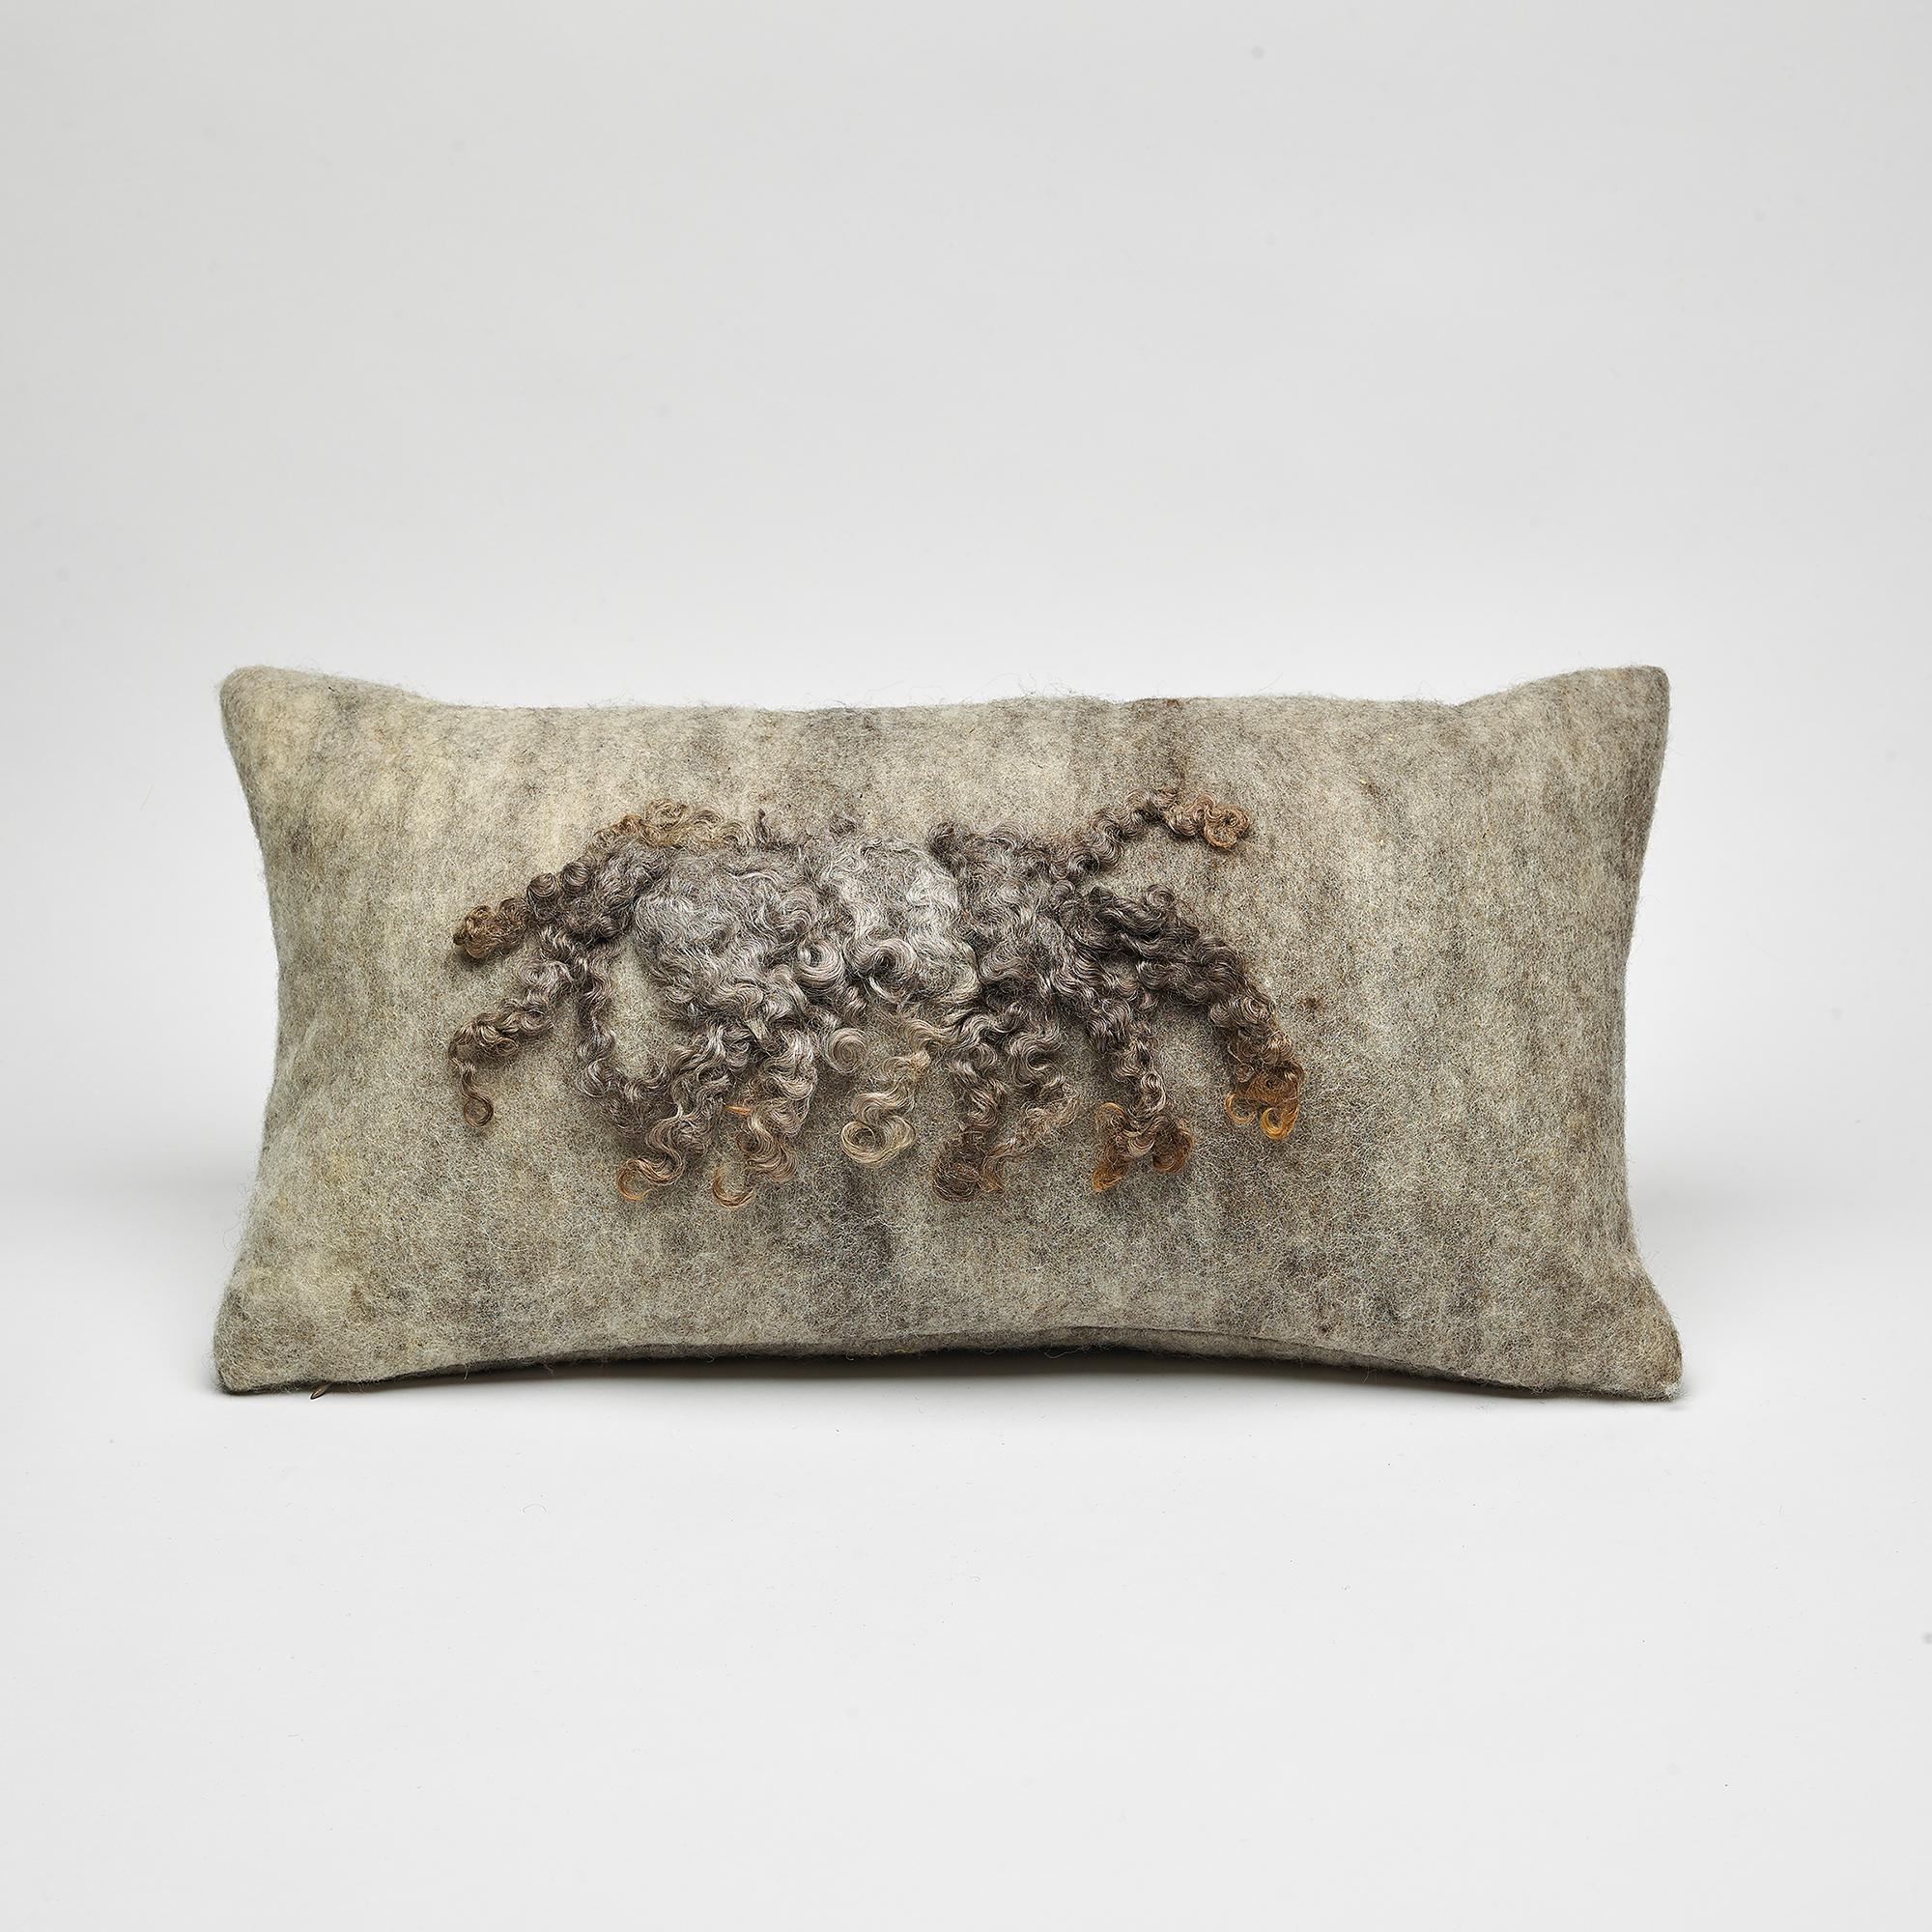 Wool Wensleydale Throw Pillow, Gray, Heritage Sheep Collection In New Condition For Sale In Sebastopol, CA